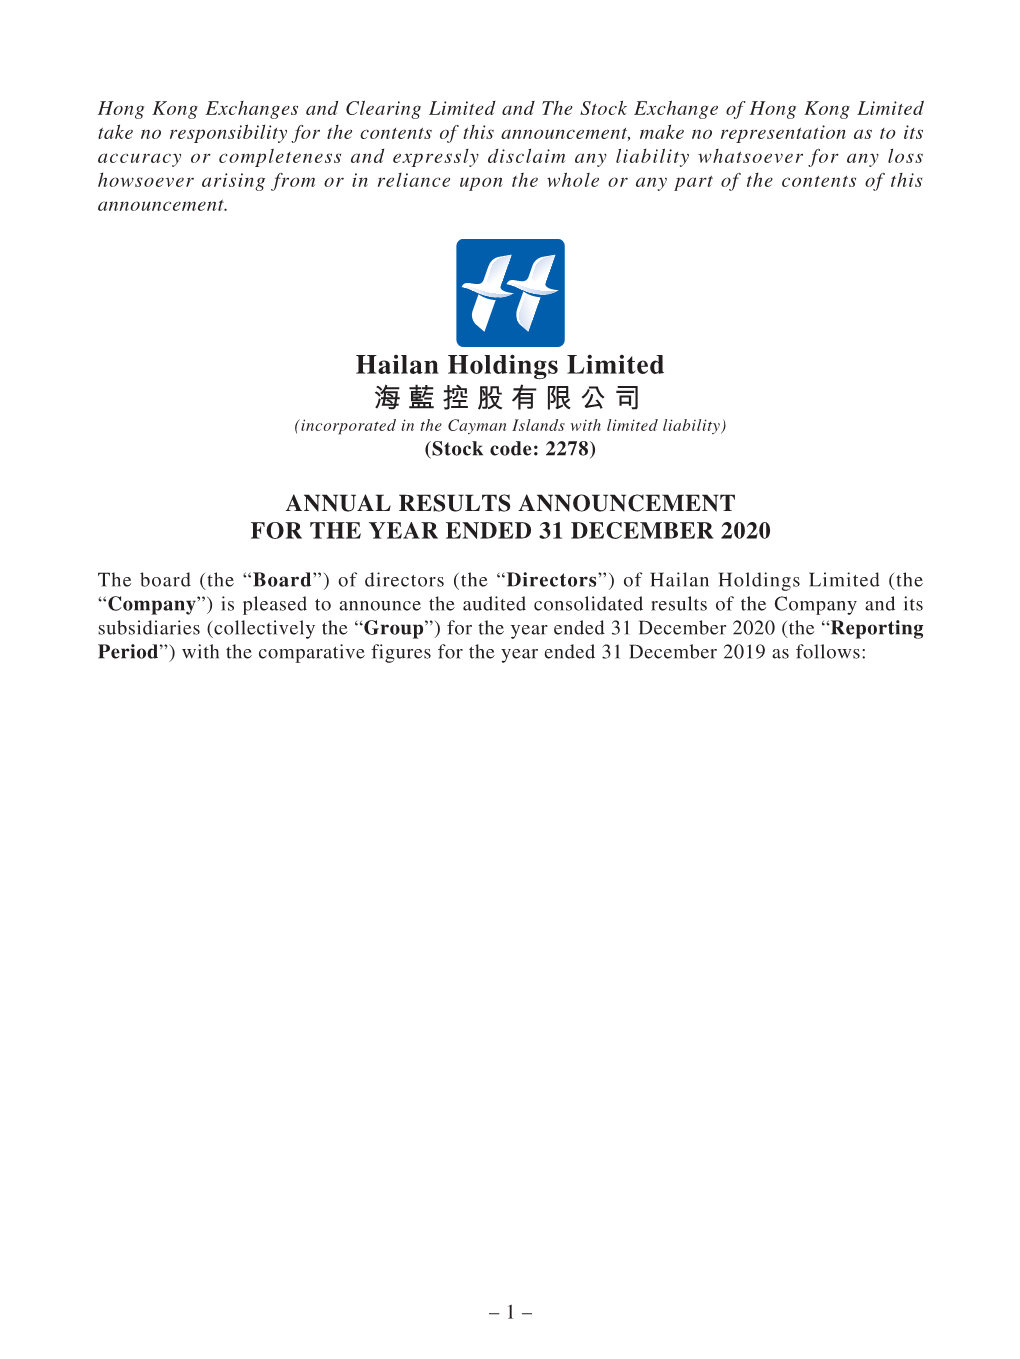 Hailan Holdings Limited 海藍控股有限公司 (Incorporated in the Cayman Islands with Limited Liability) (Stock Code: 2278)